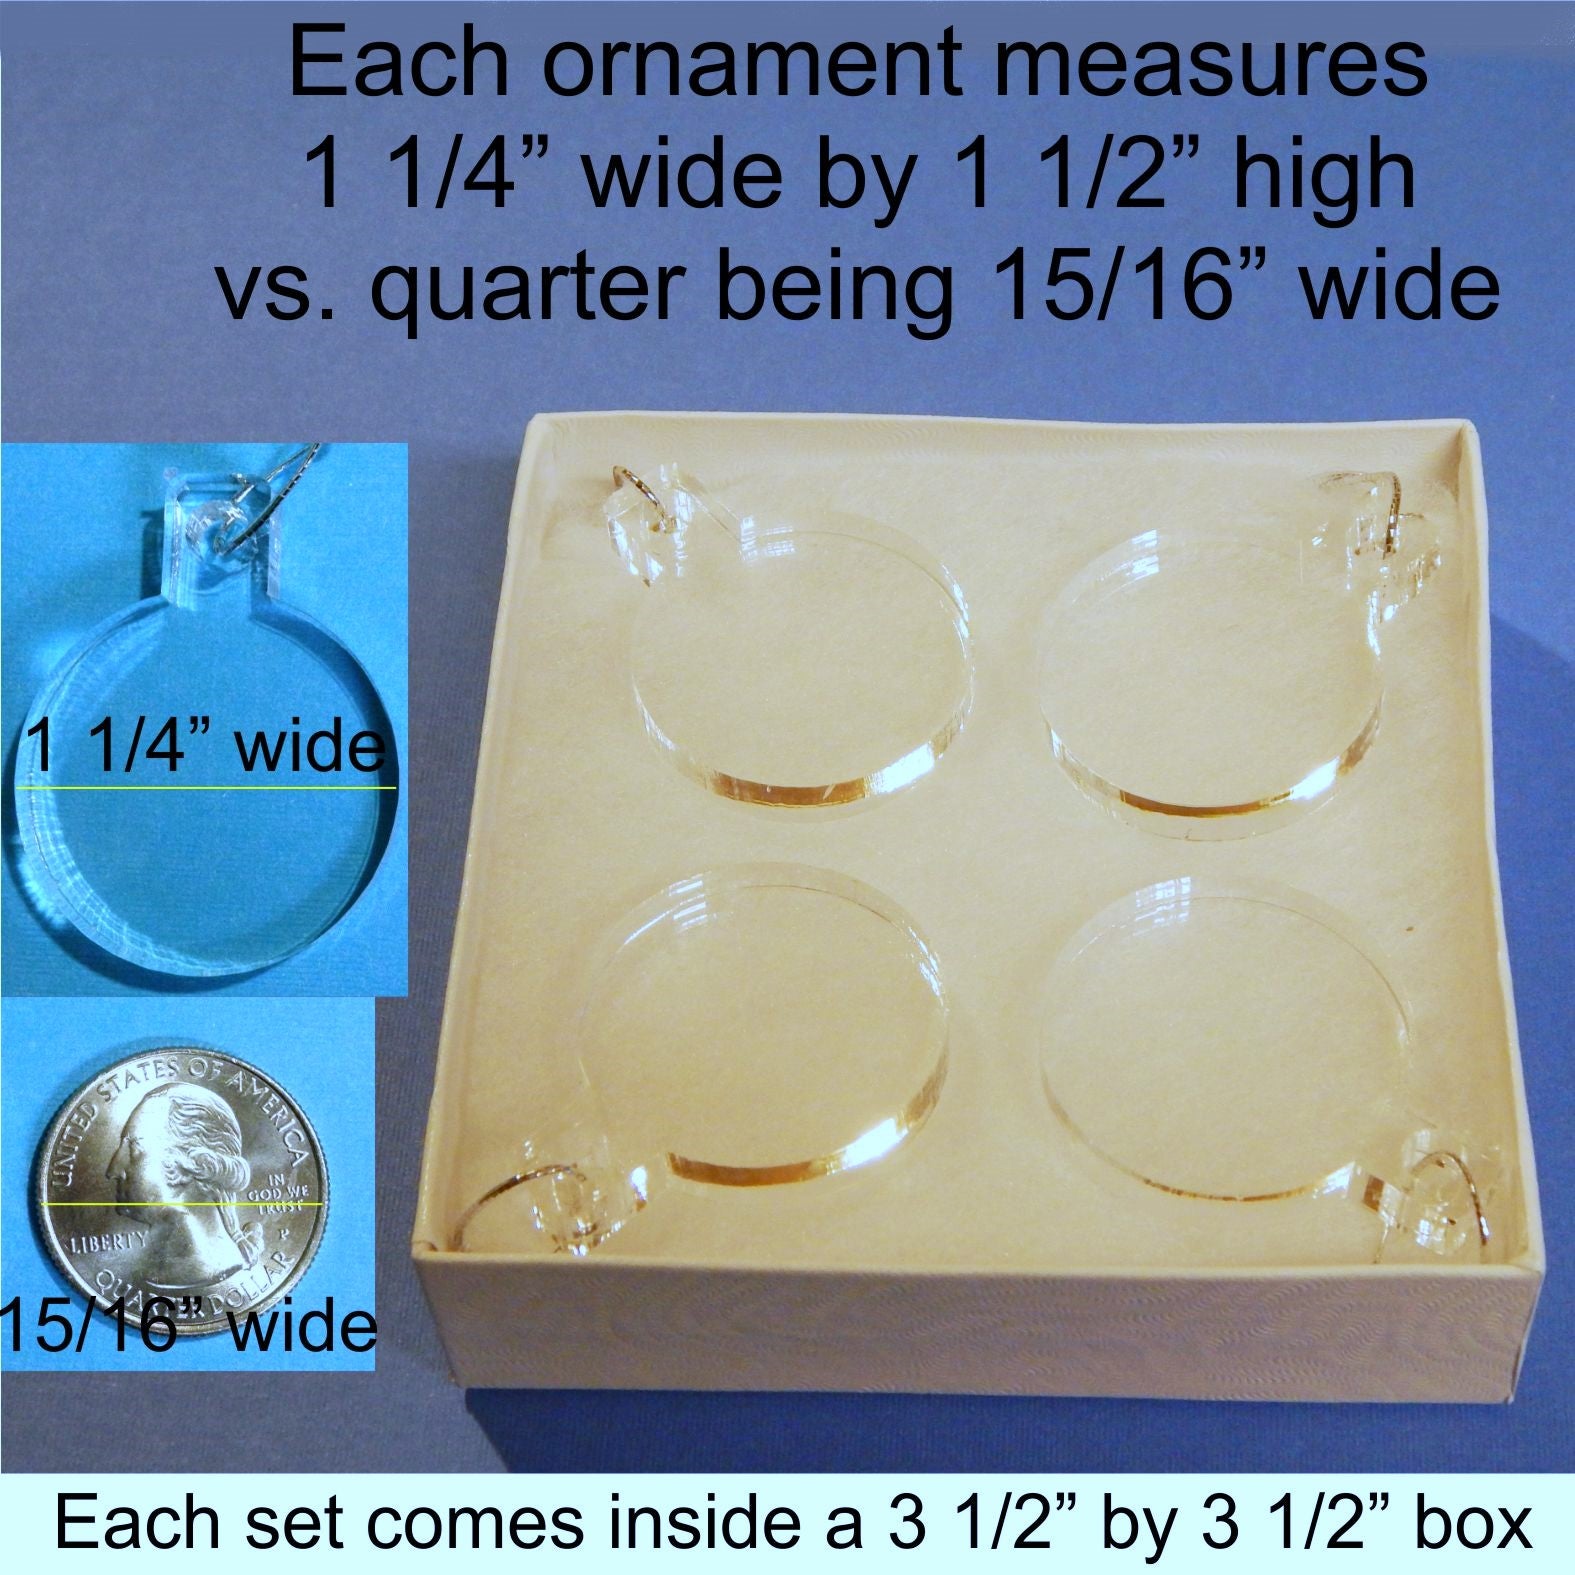 clear acrylic round ornament shown above a quarter for sizing view and a gift box view showing 4 plain round ornaments inside the box